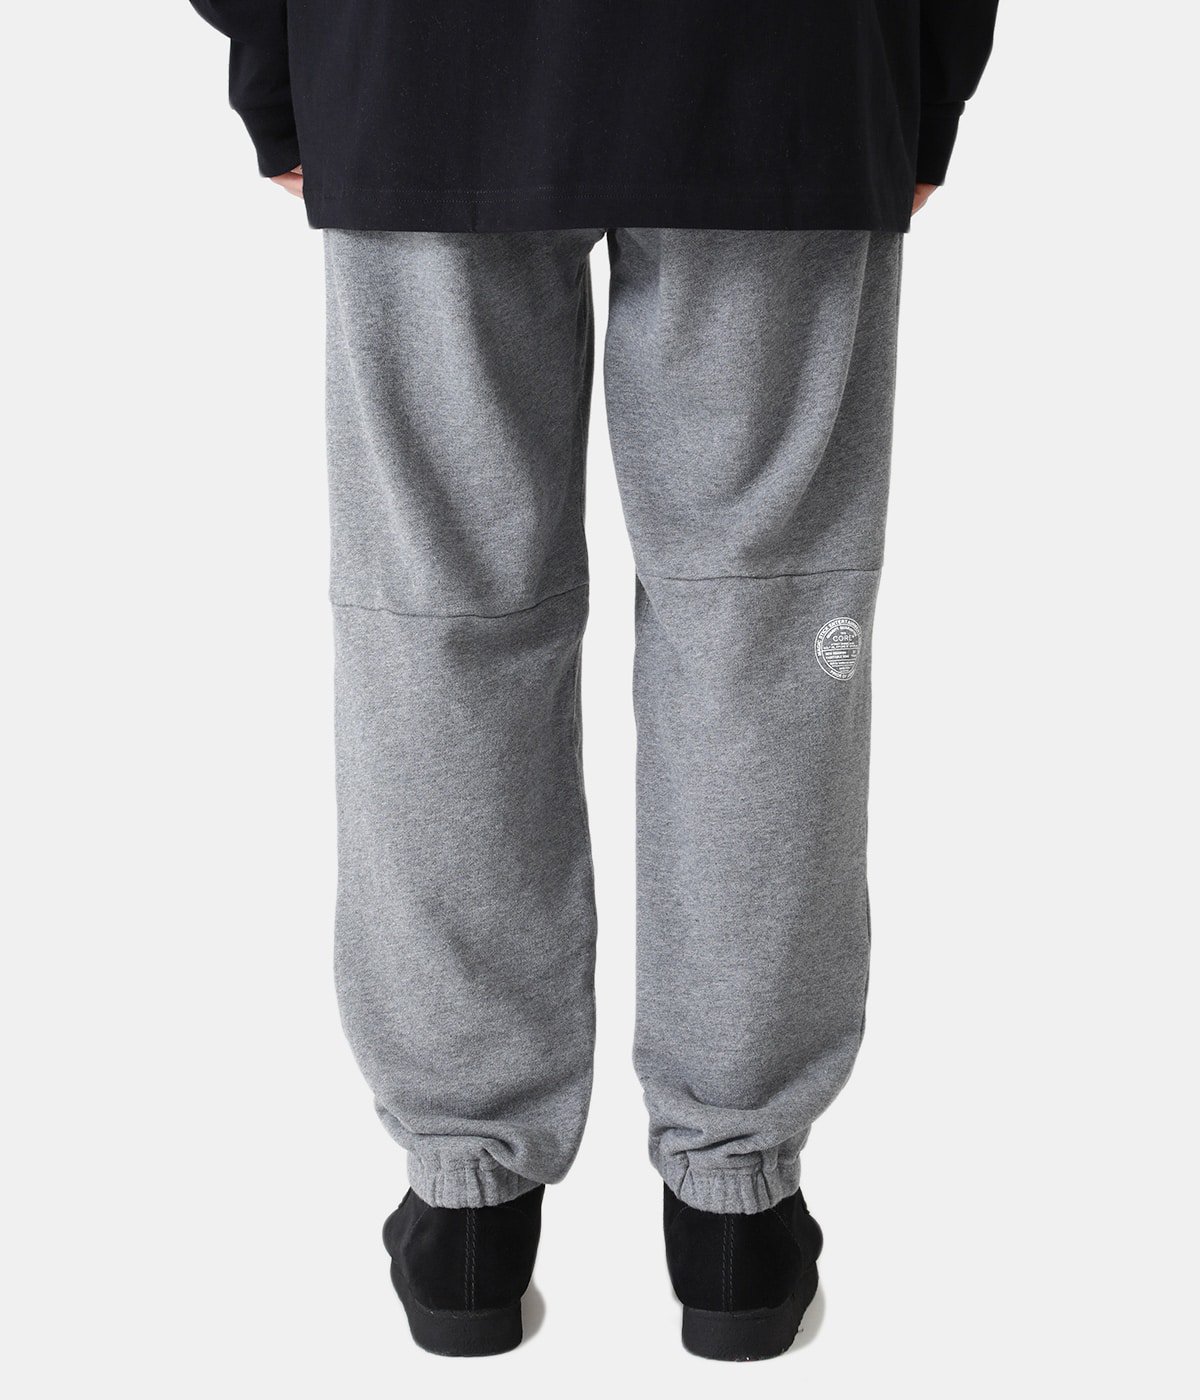 THE CORE Ideal Regular fit Sweat Pants